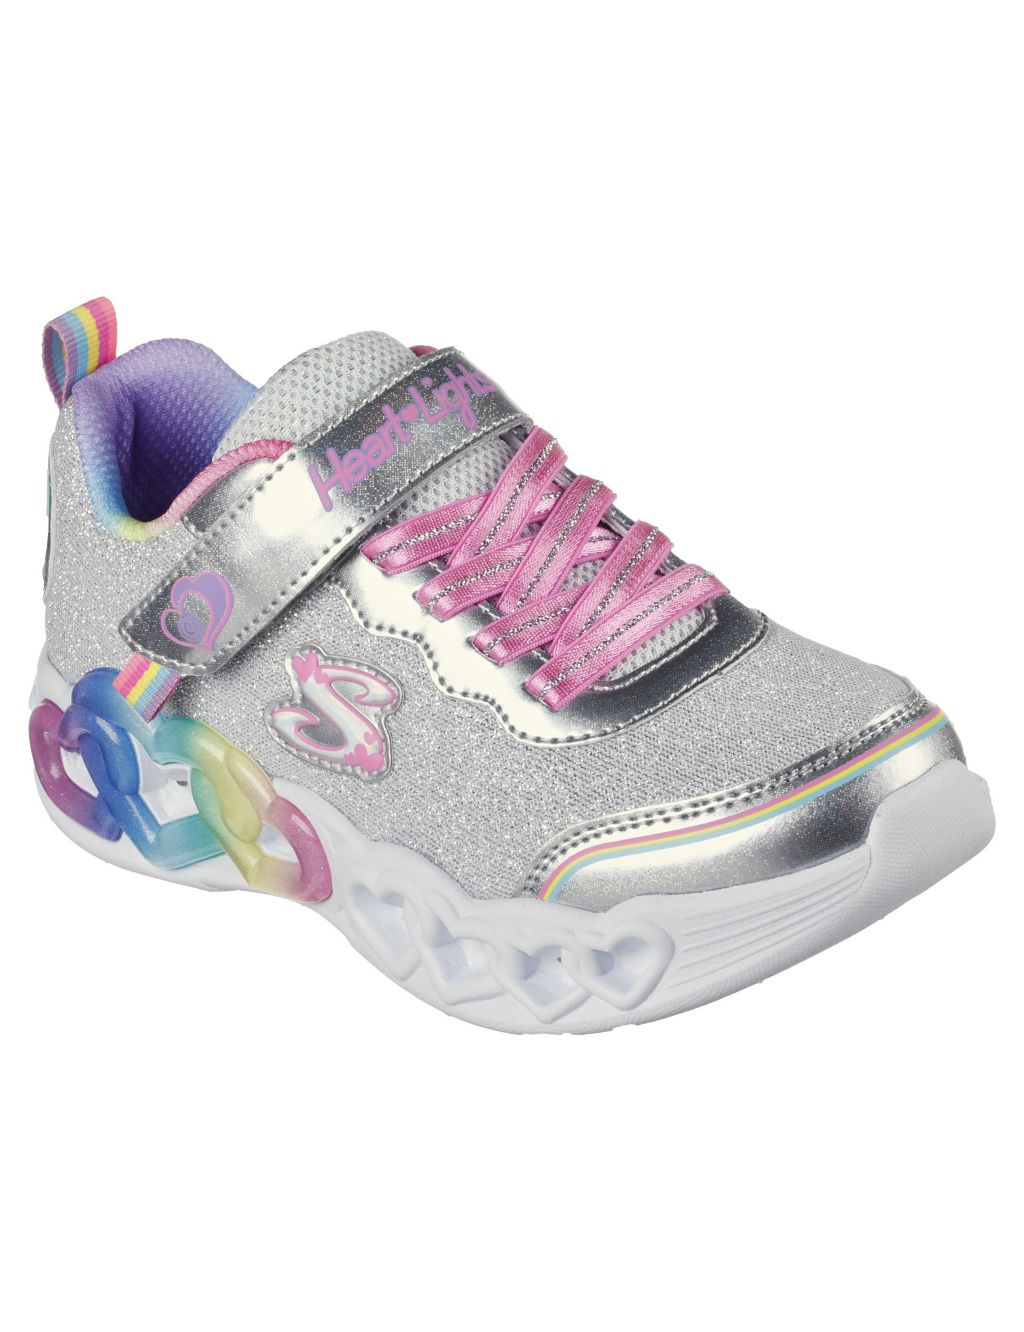 Infinite Heart Lights Love Prism Trainers (9.5 Small - 3 Large) image 2